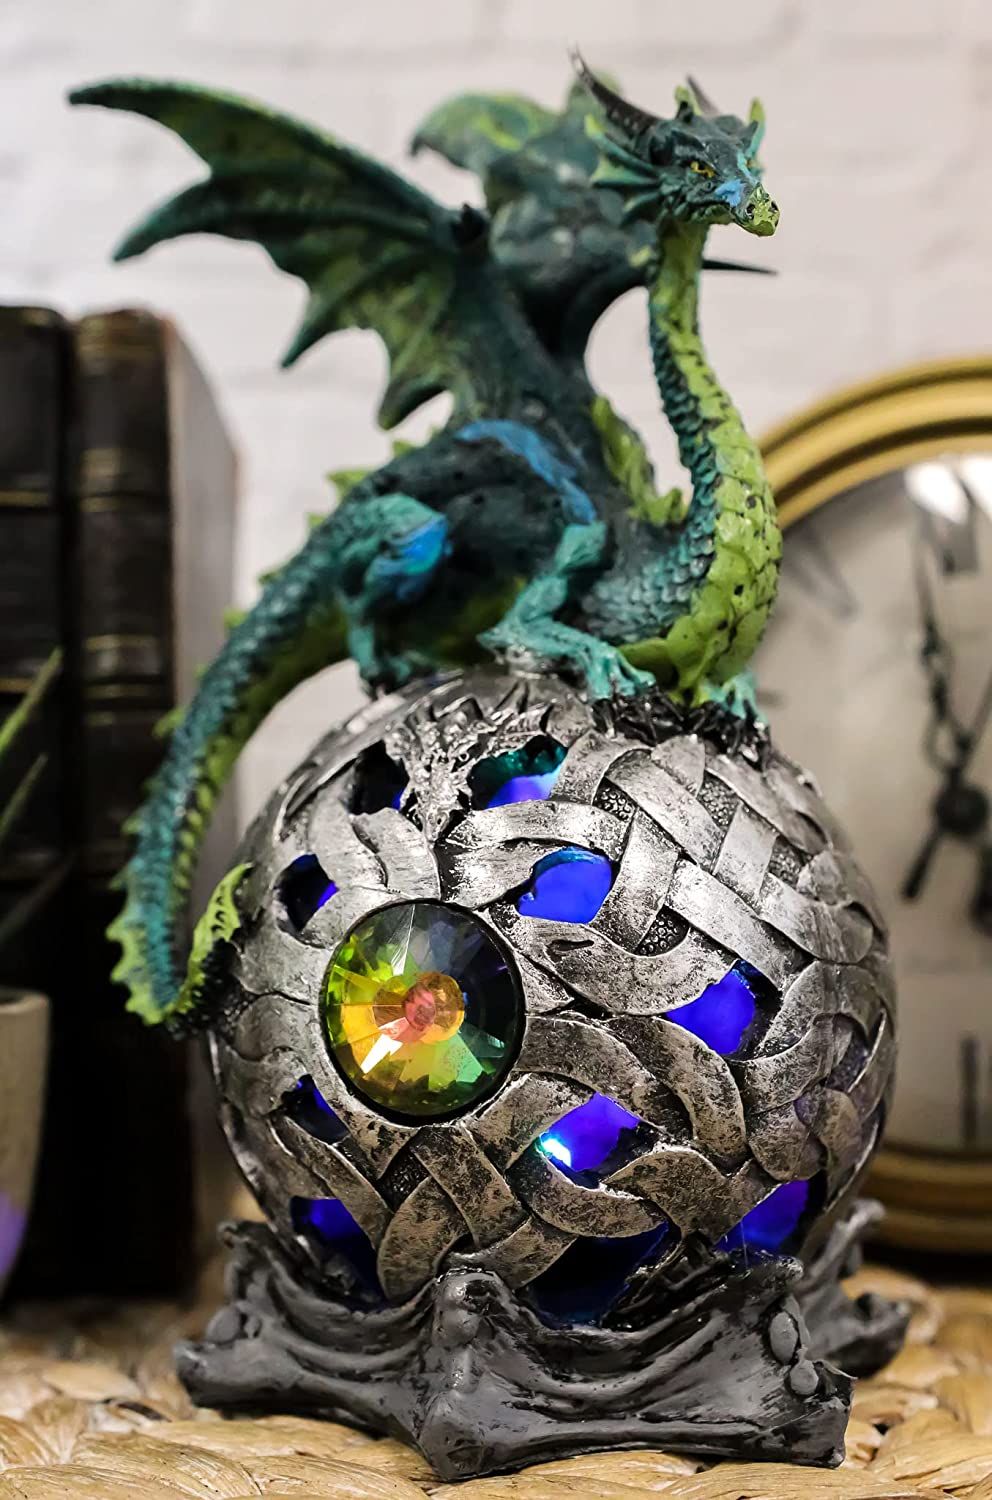 The 10 Best Dungeons & Dragons Collectibles (Updated 2022)